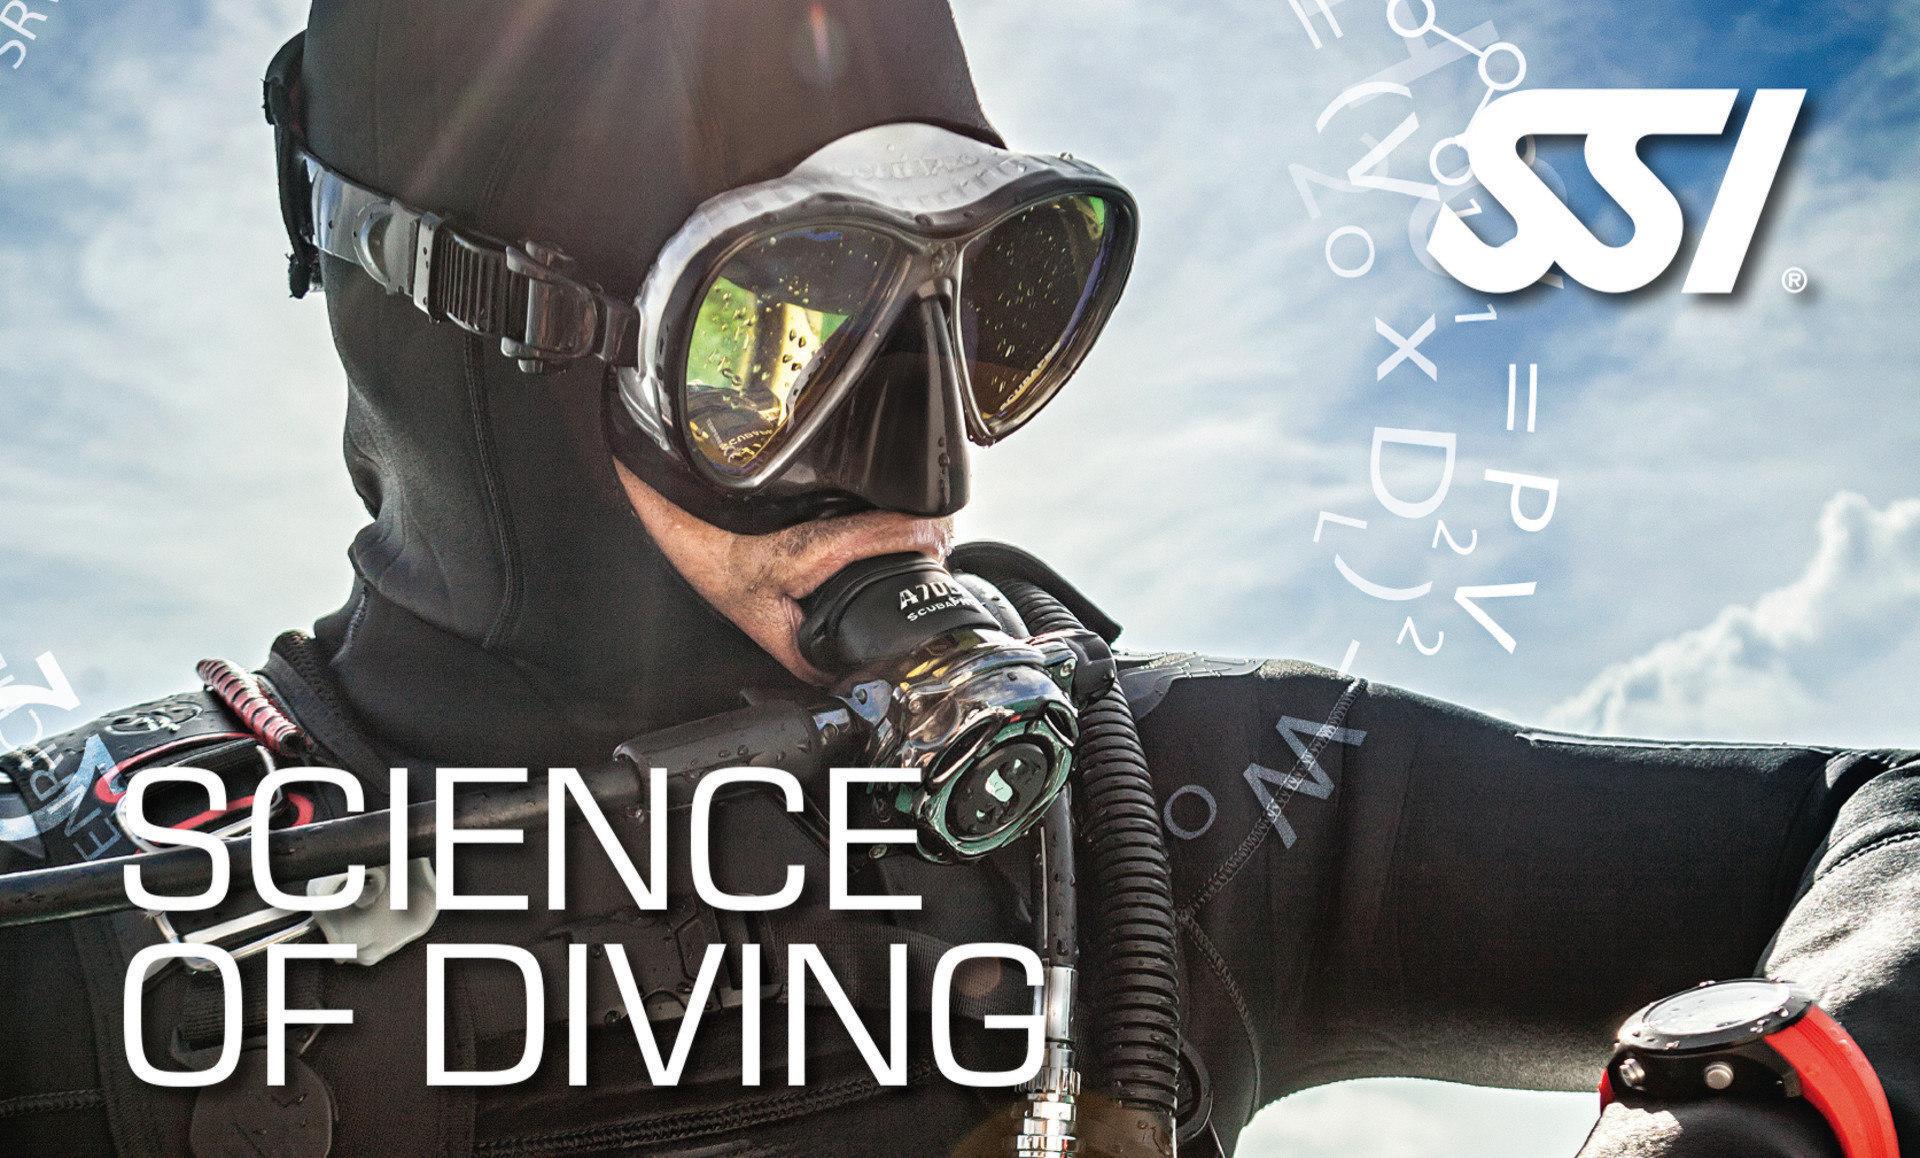 the SSI Science of Diving course